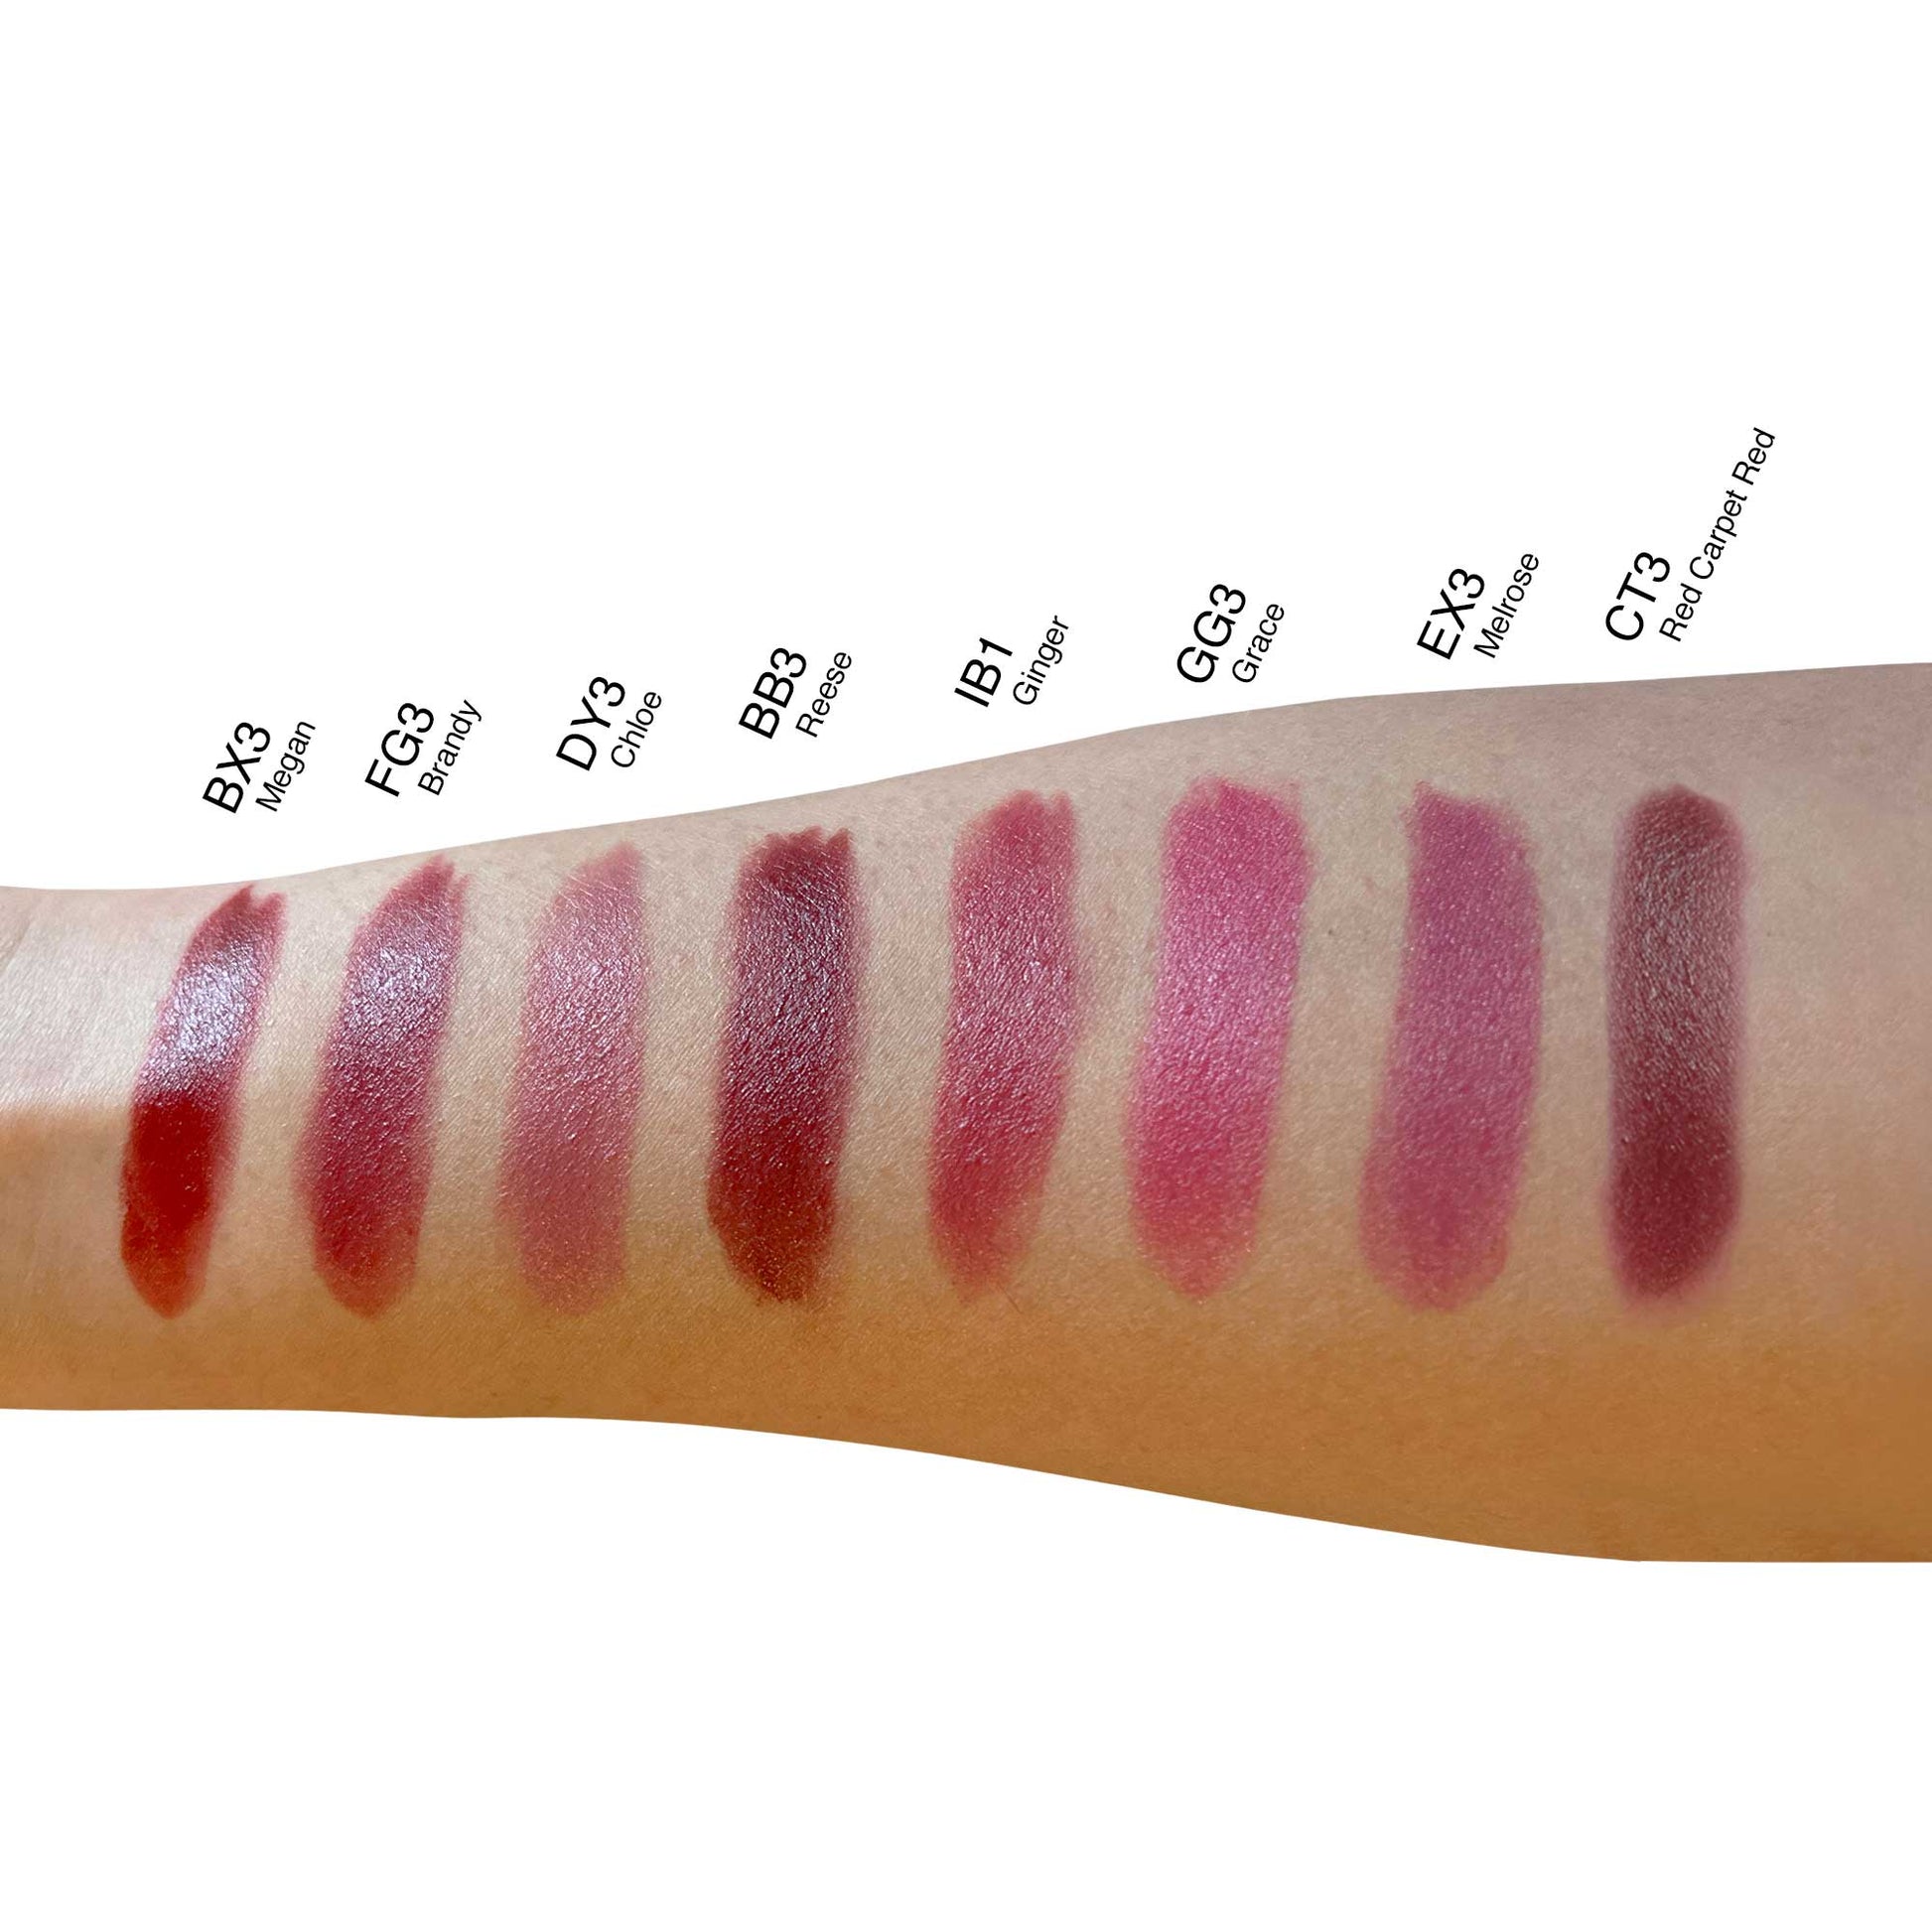 8 Lip shades. Our new formulation offers a vibrant color palette and hydration, while delivering a gentle matte finish.